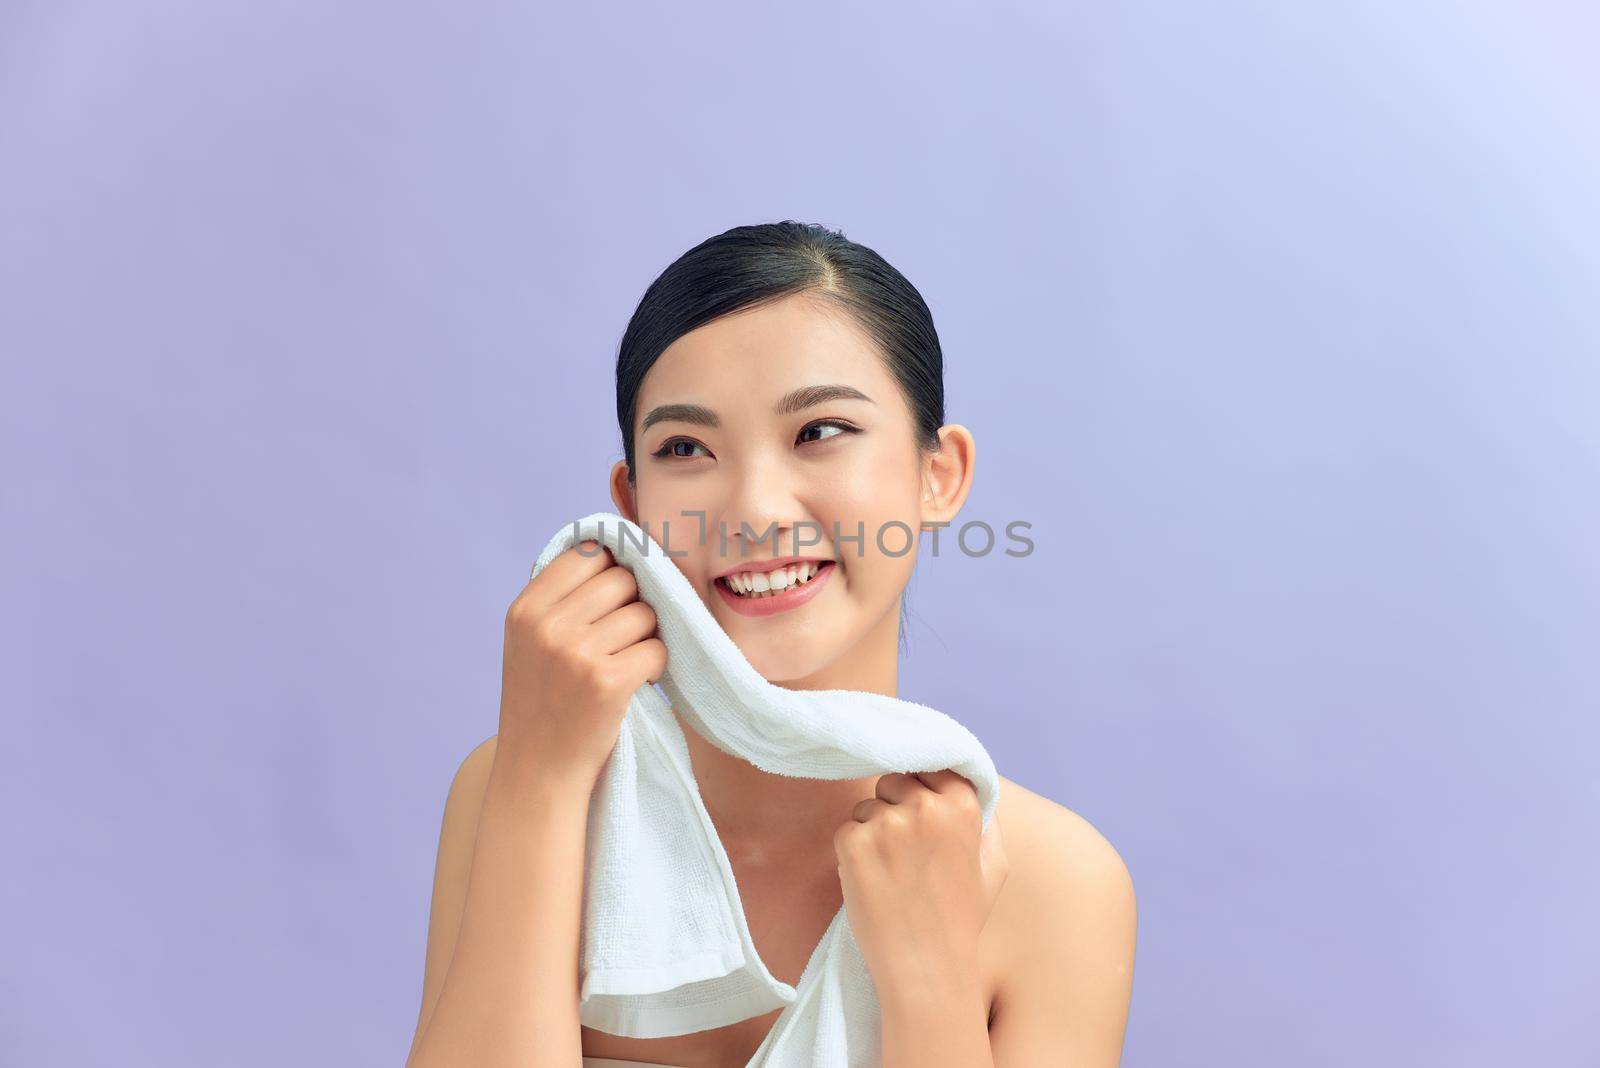 Woman cleaning facial skin with towel after washing face portrait by makidotvn